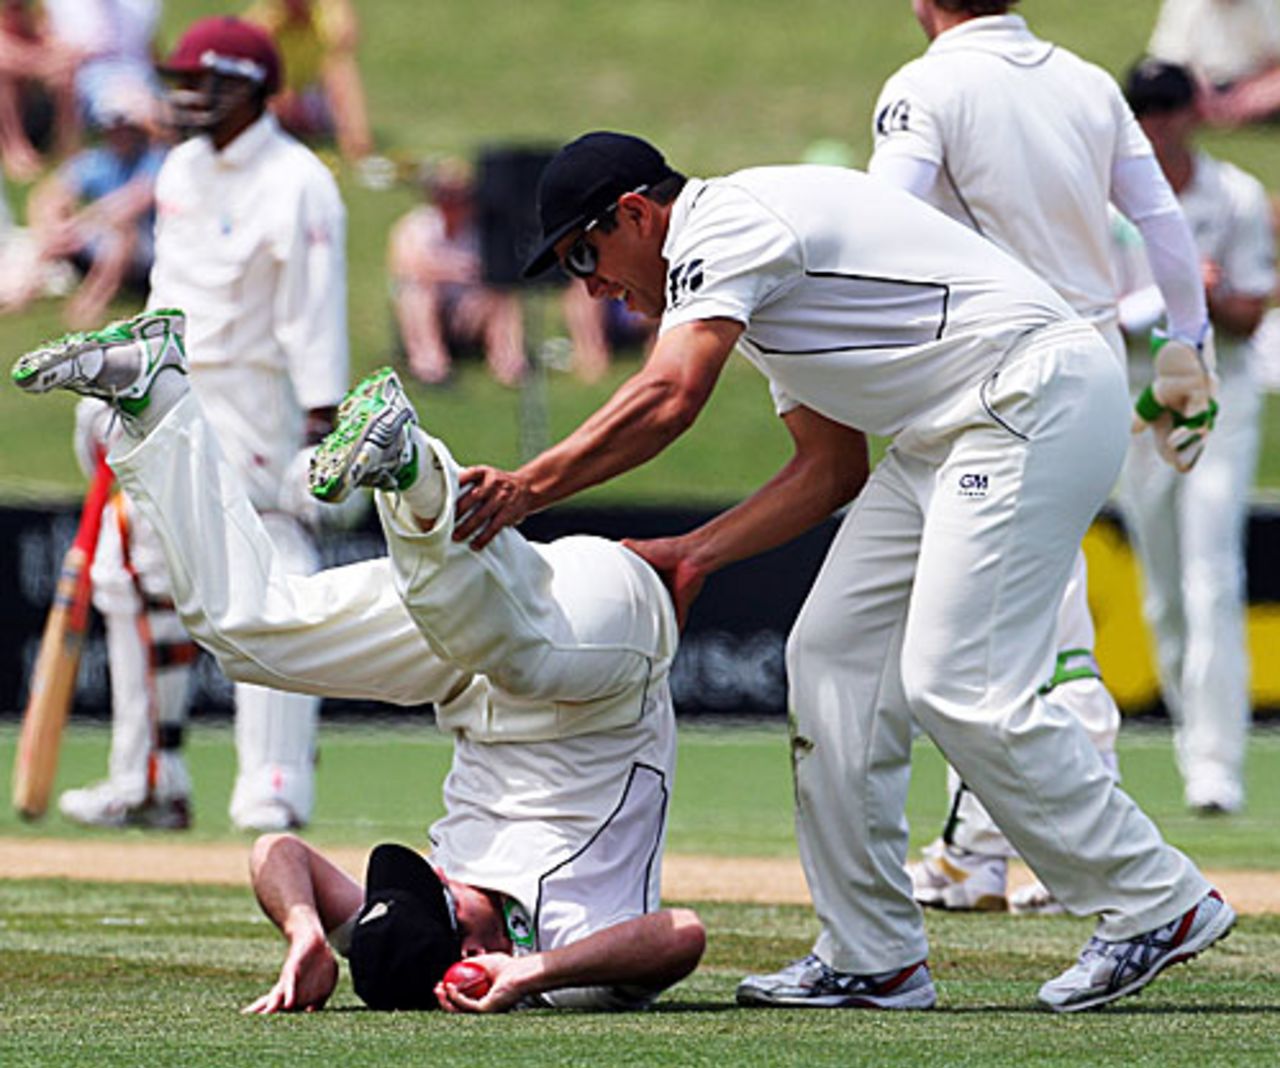 Jamie How falls over after taking a catch over his head, New Zealand v West Indies, 2nd Test, Napier, 1st day, December 19, 2008